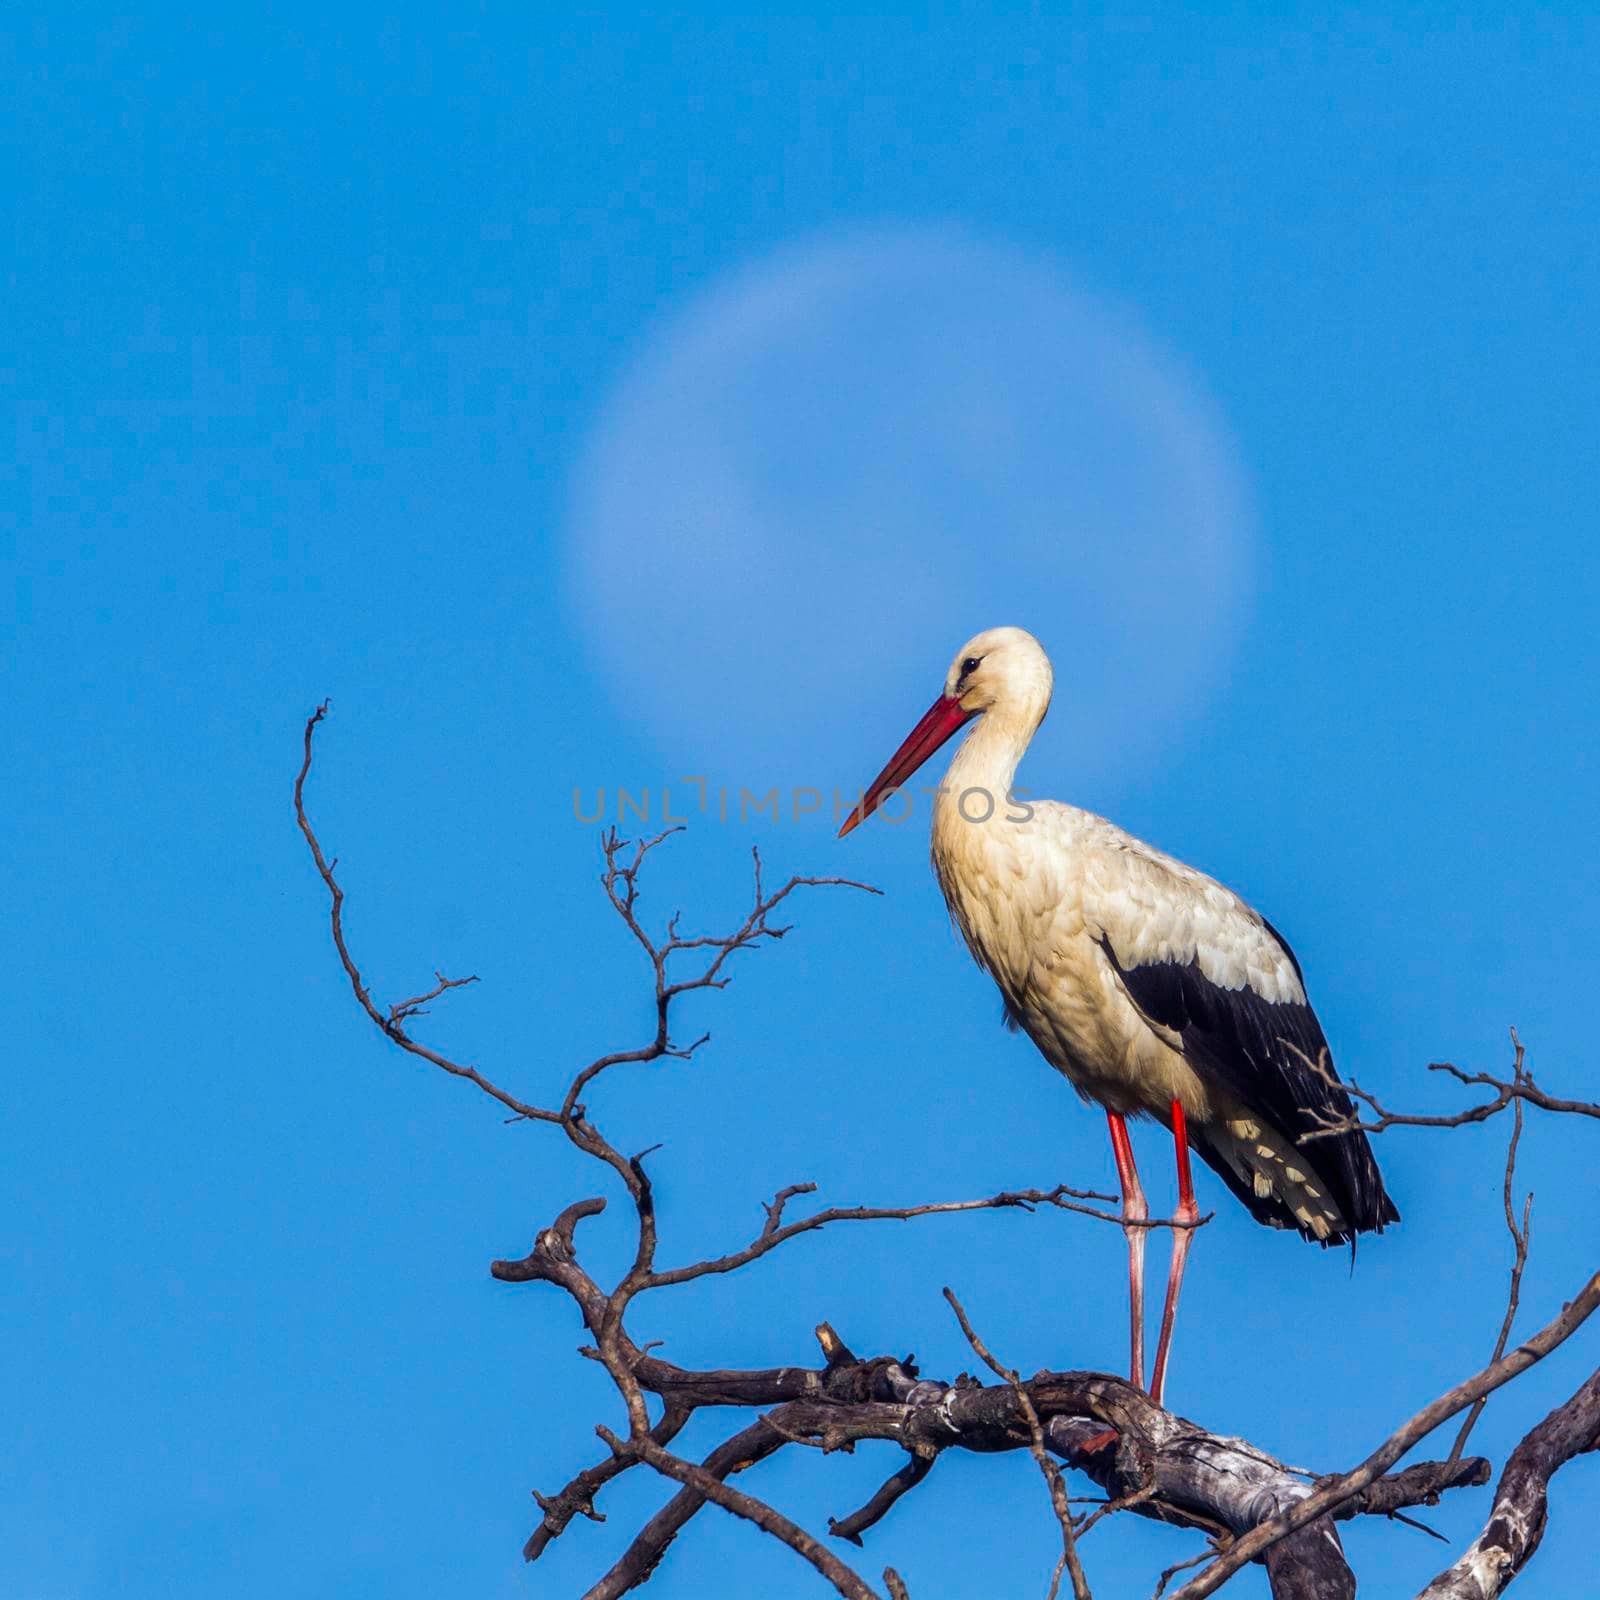 White Stork in Kruger National park, South Africa by PACOCOMO